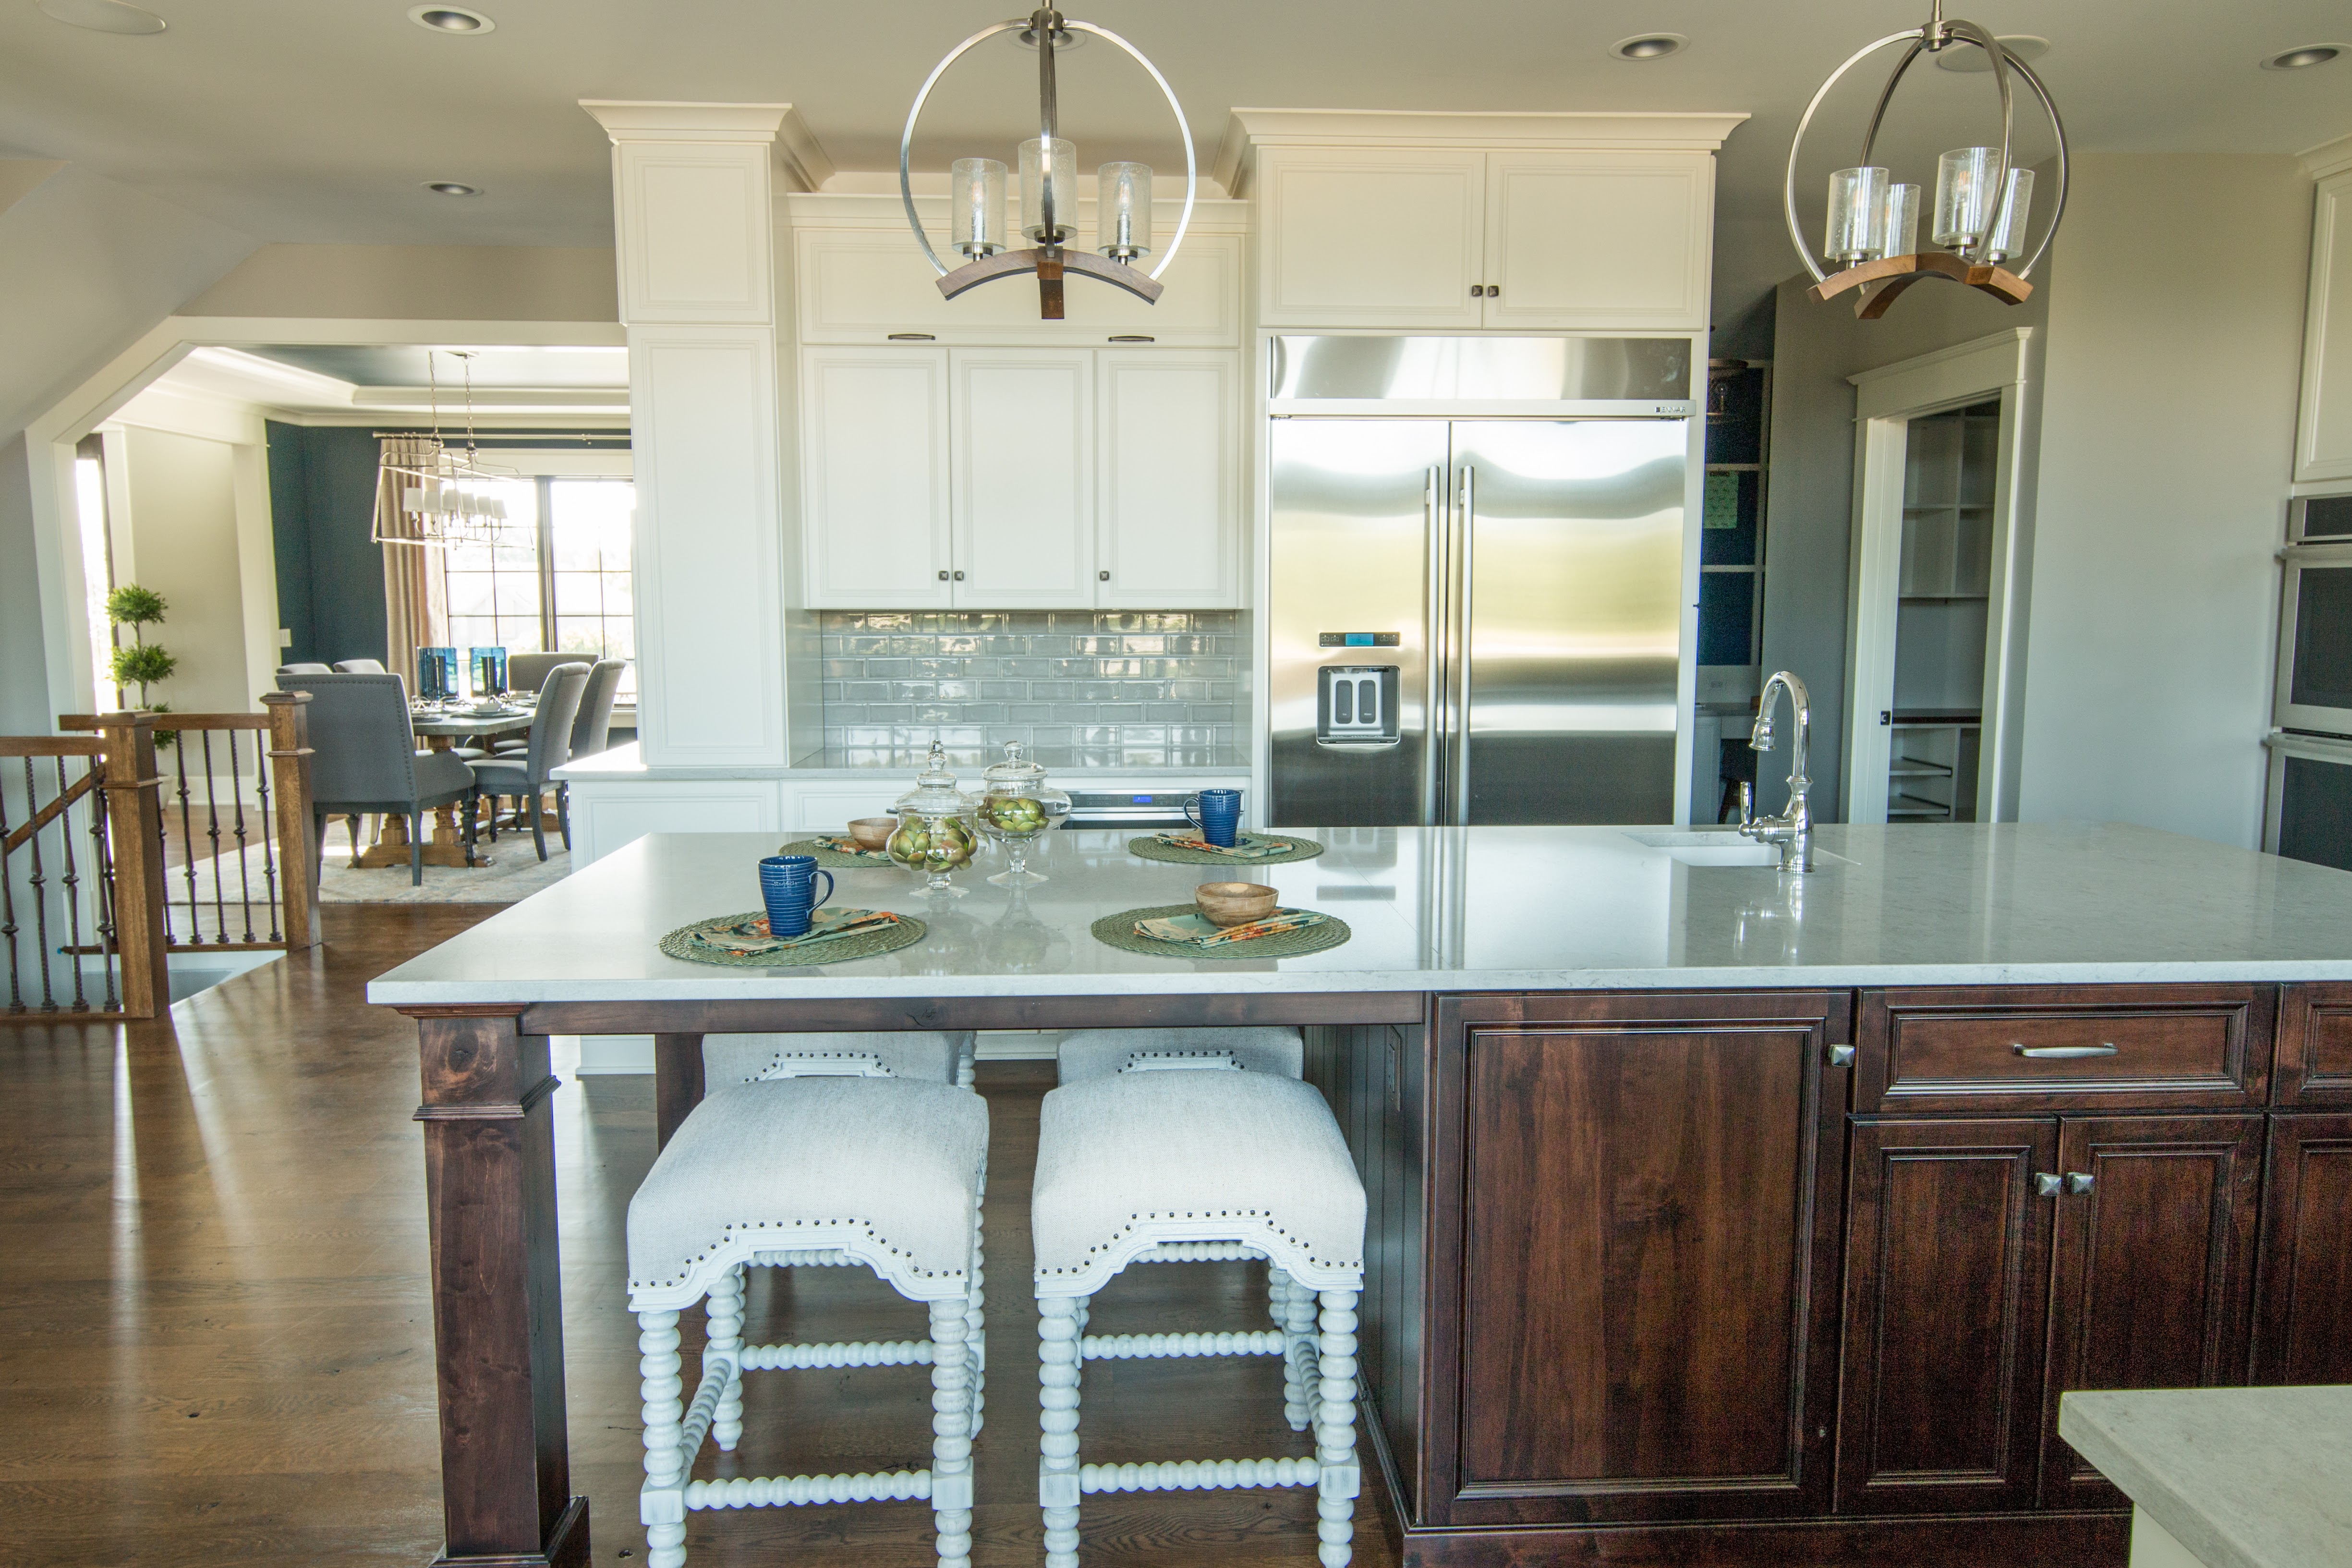 Dark kitchen island with white upholstered stools and farmhouse style pendant lighting